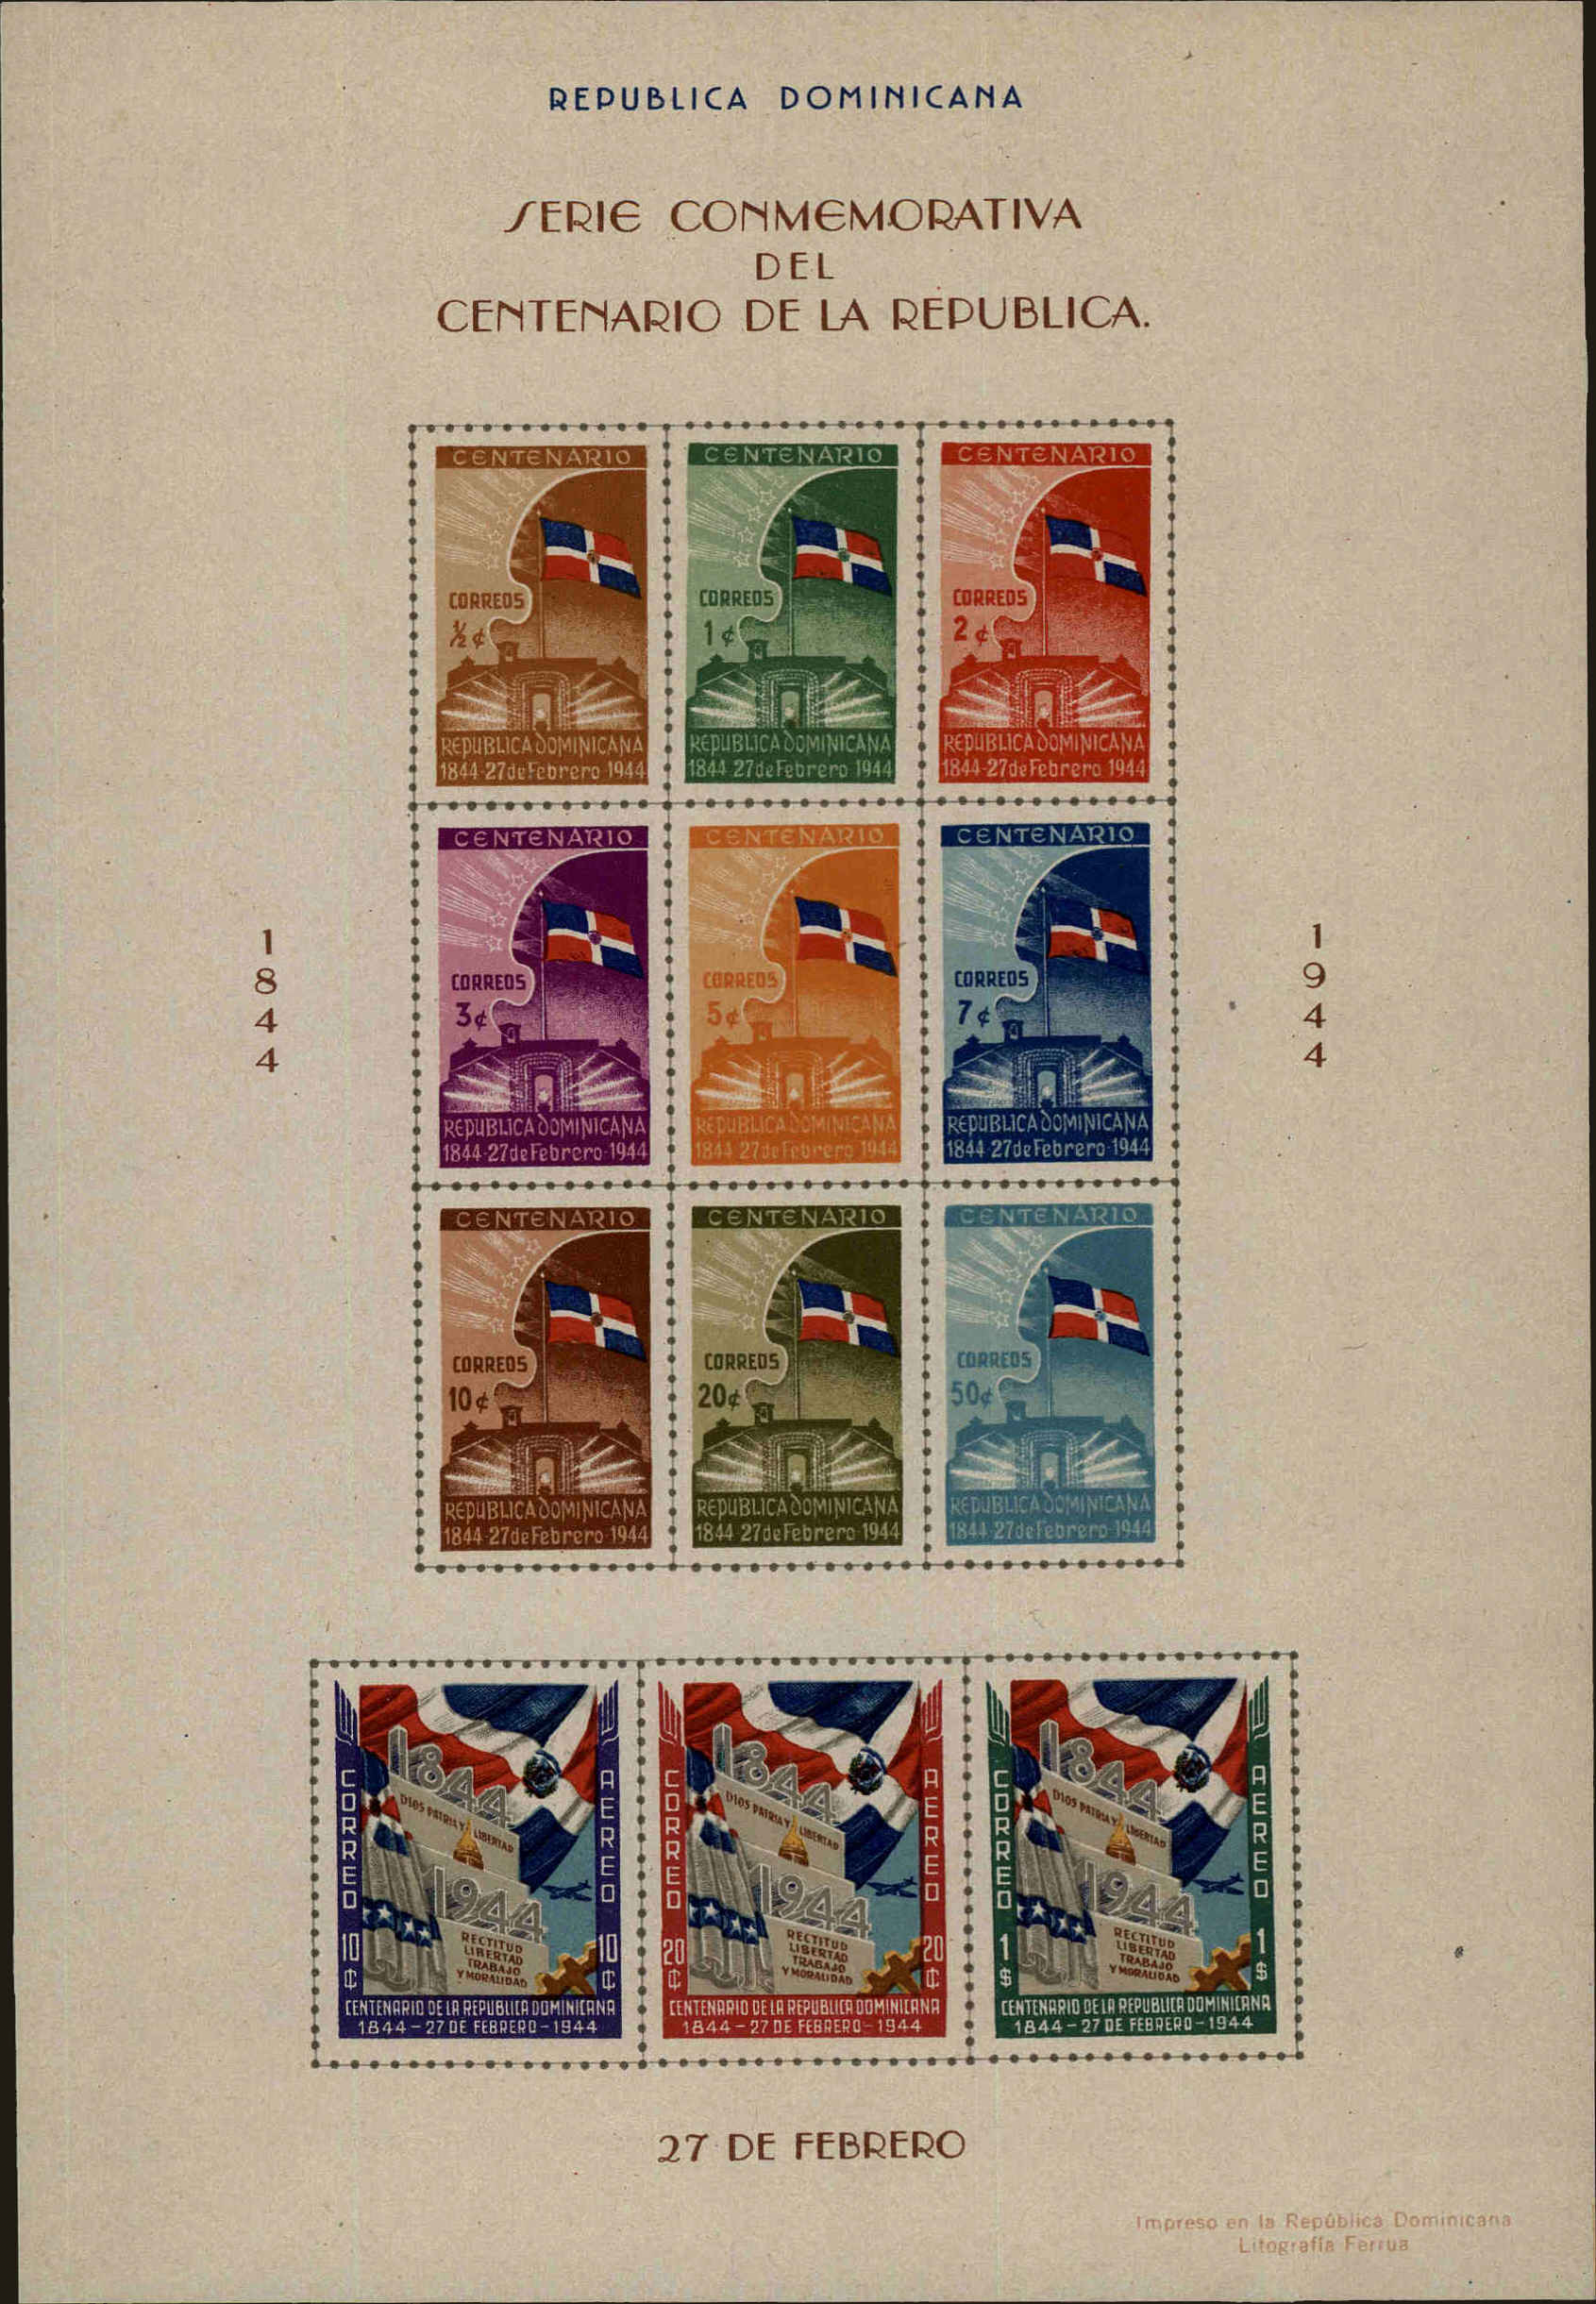 Front view of Dominican Republic 407 collectors stamp